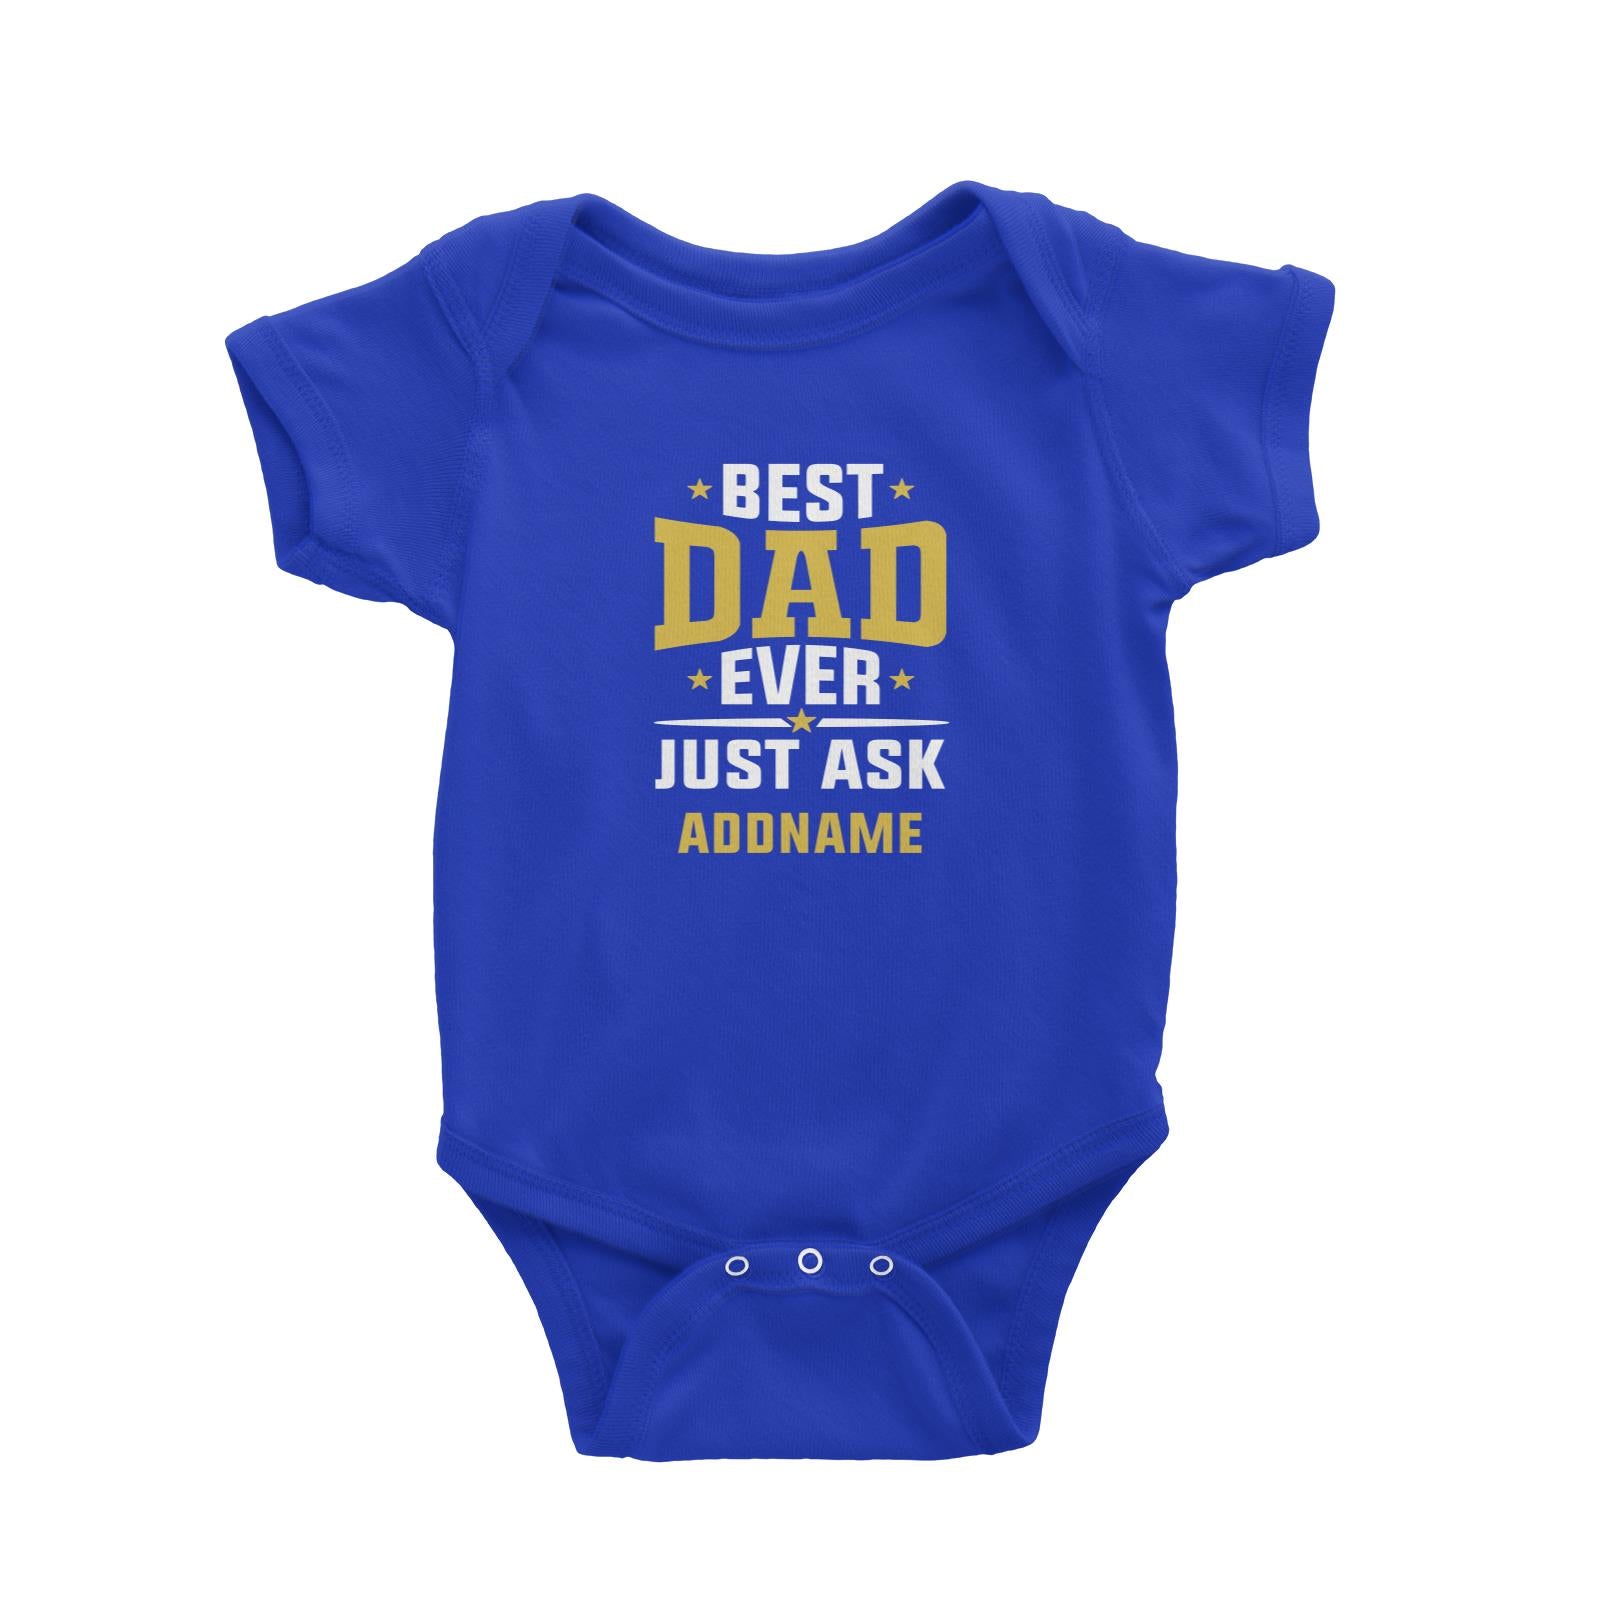 Best Dad Ever Just Ask Addname Baby Romper